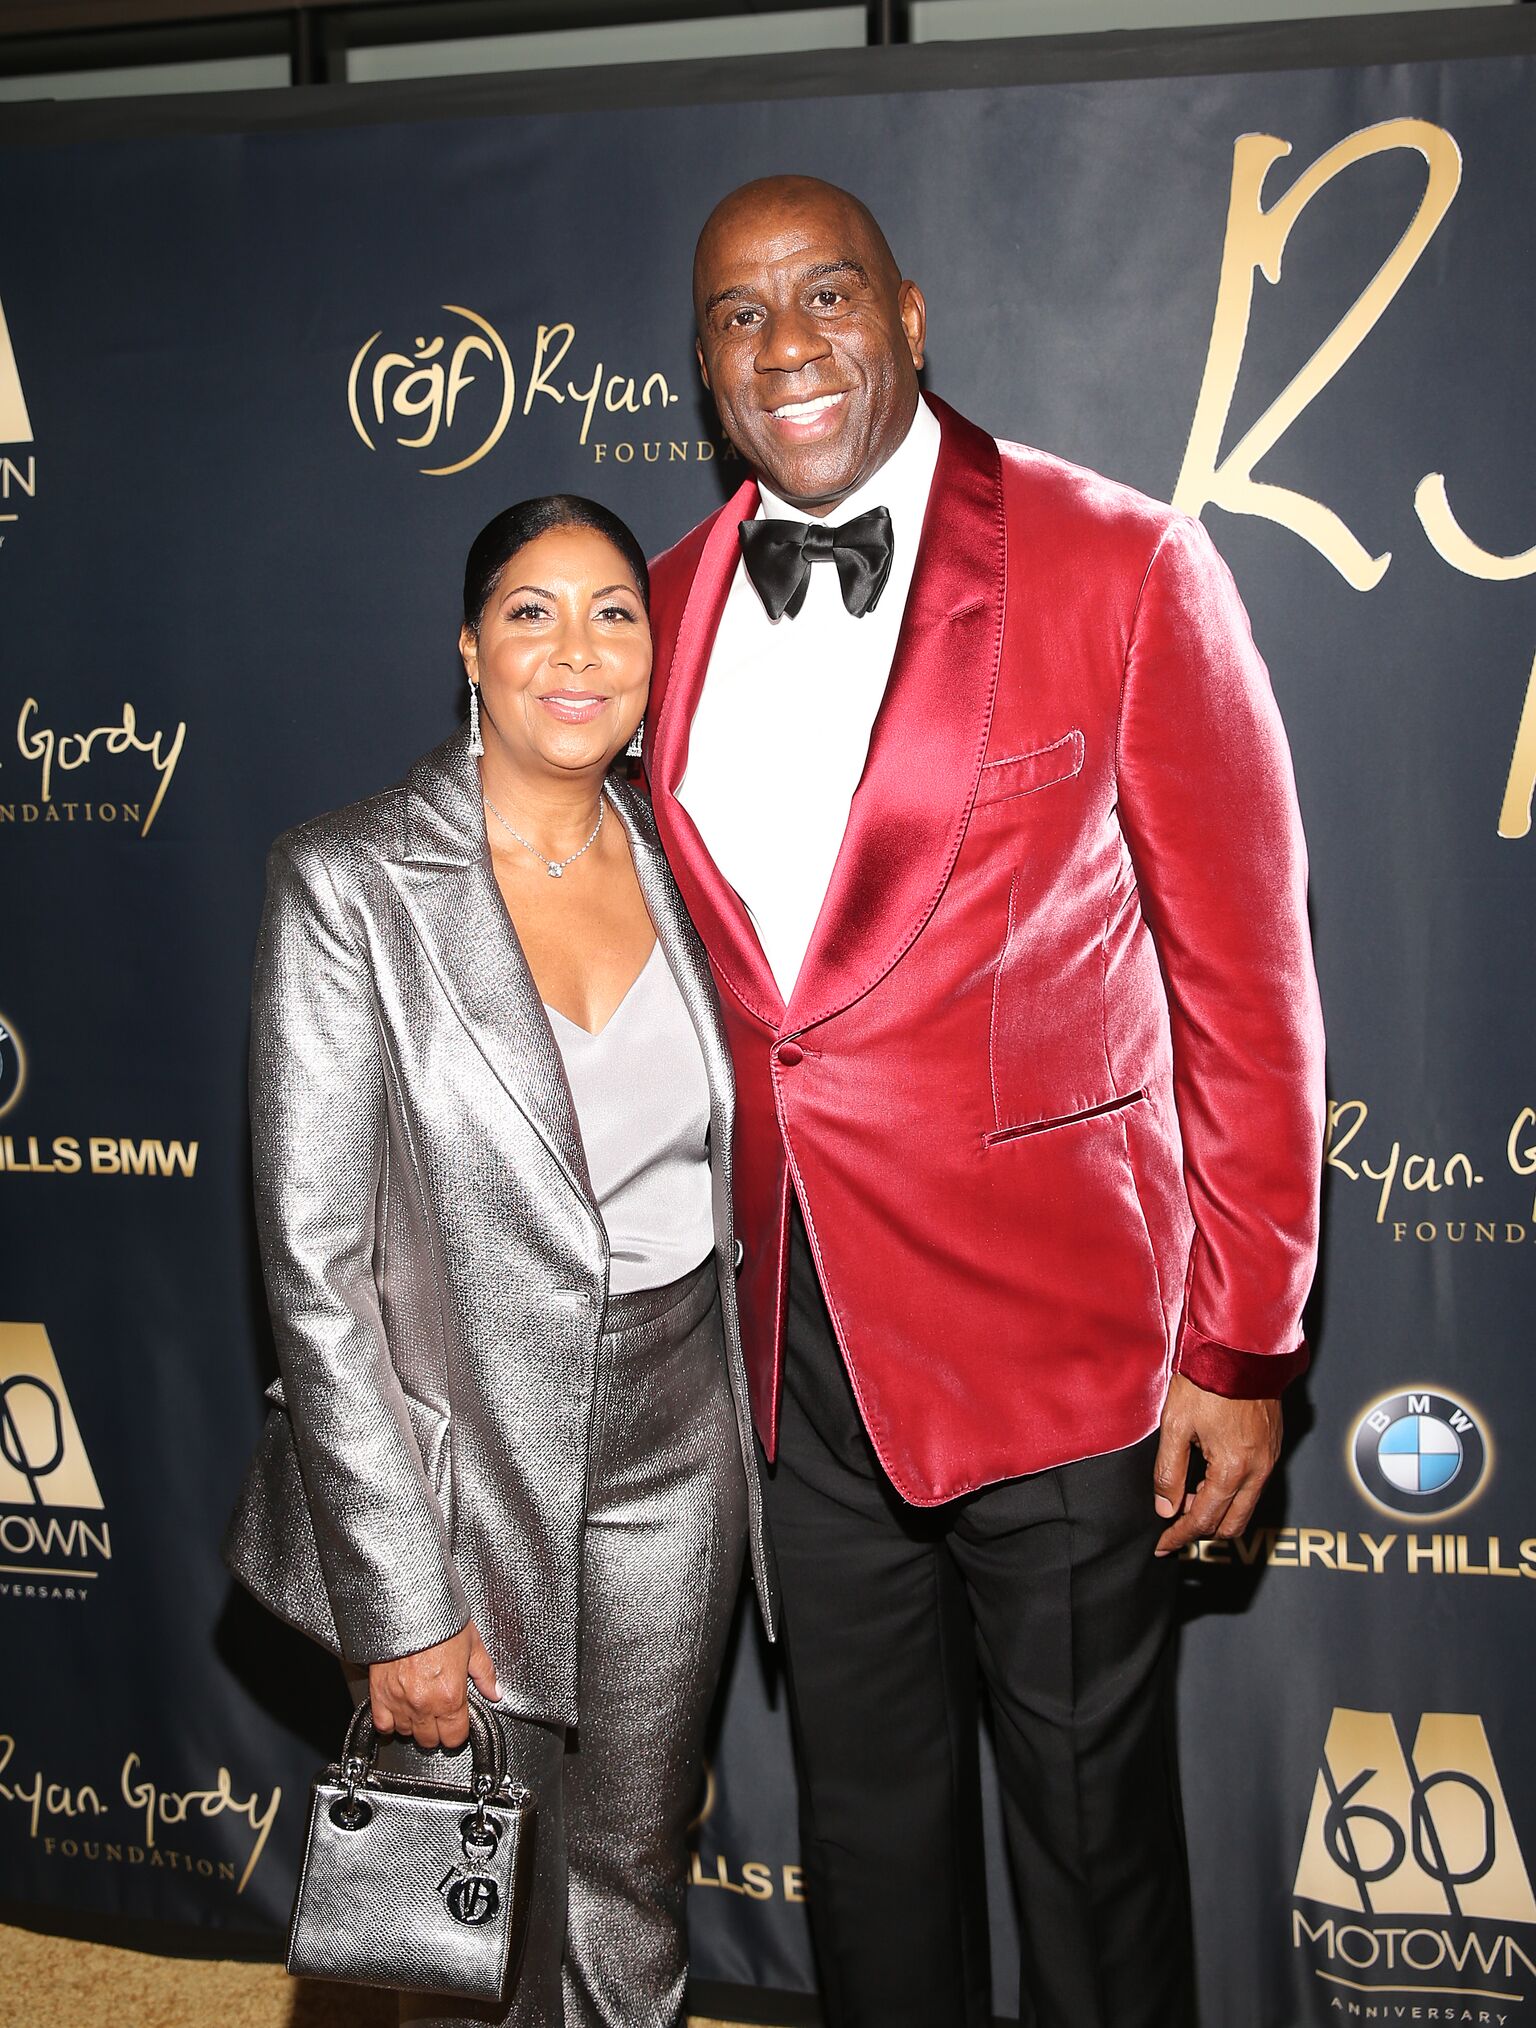 Cookie Johnson and Earvin "Magic" Johnson attend the Ryan Gordy Foundation "60 Years of Motown" Celebration at the Waldorf Astoria Beverly Hills | Getty Images